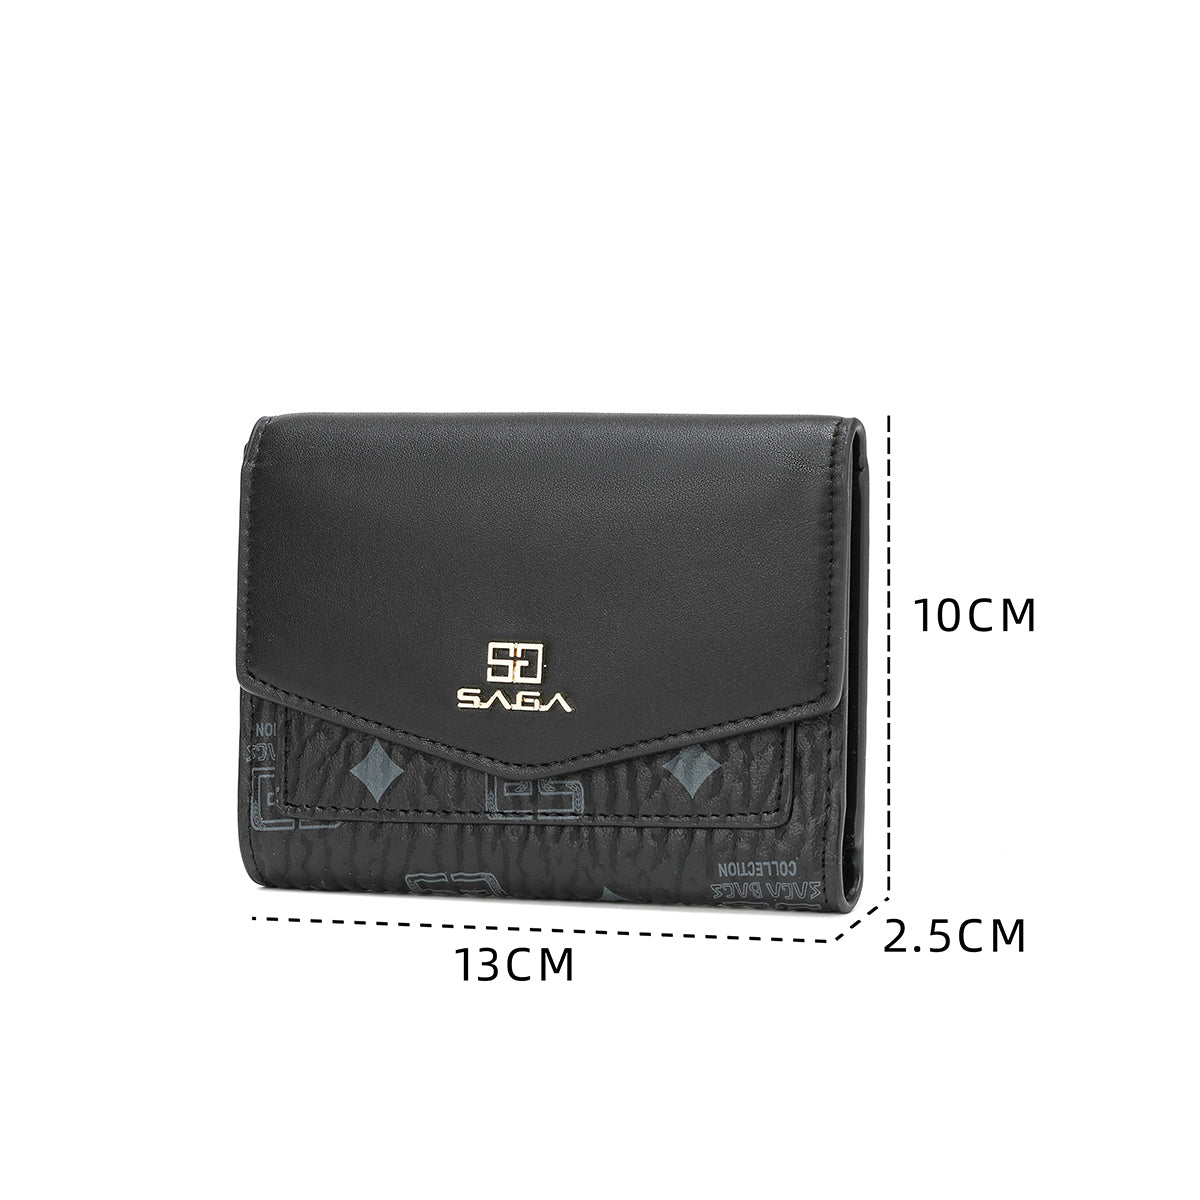 Women's wallet in black luxury leather with gold Saga logo